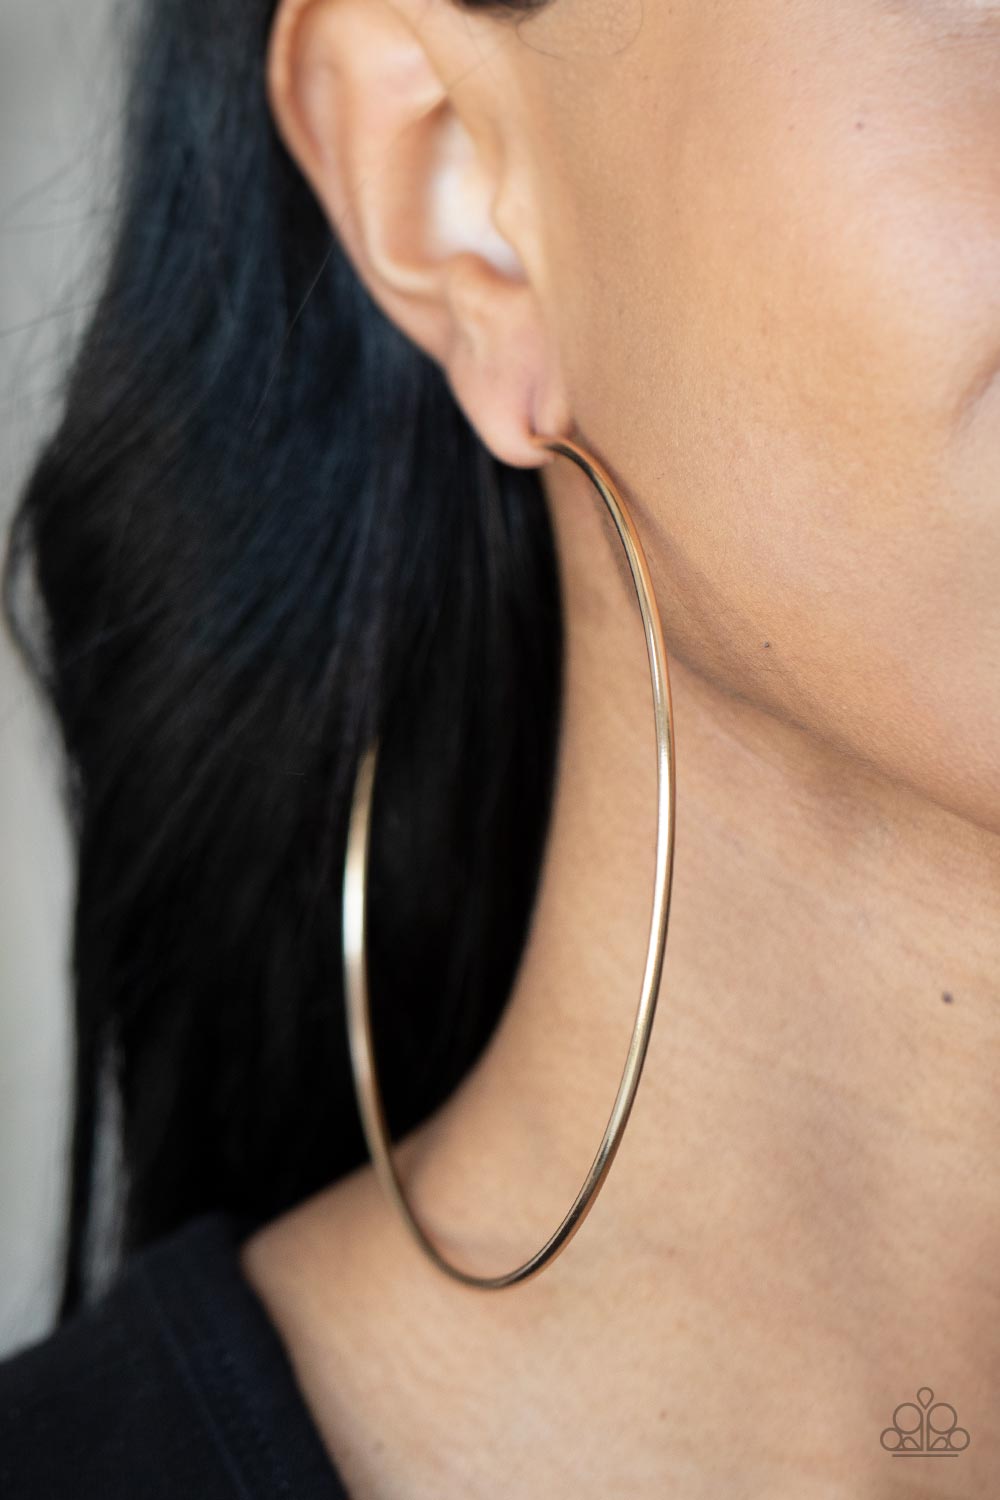 A classic gold bar curls into an outrageously oversized hoop for a trendsetting look. Earring attaches to a standard post fitting. Hoop measures approximately 4